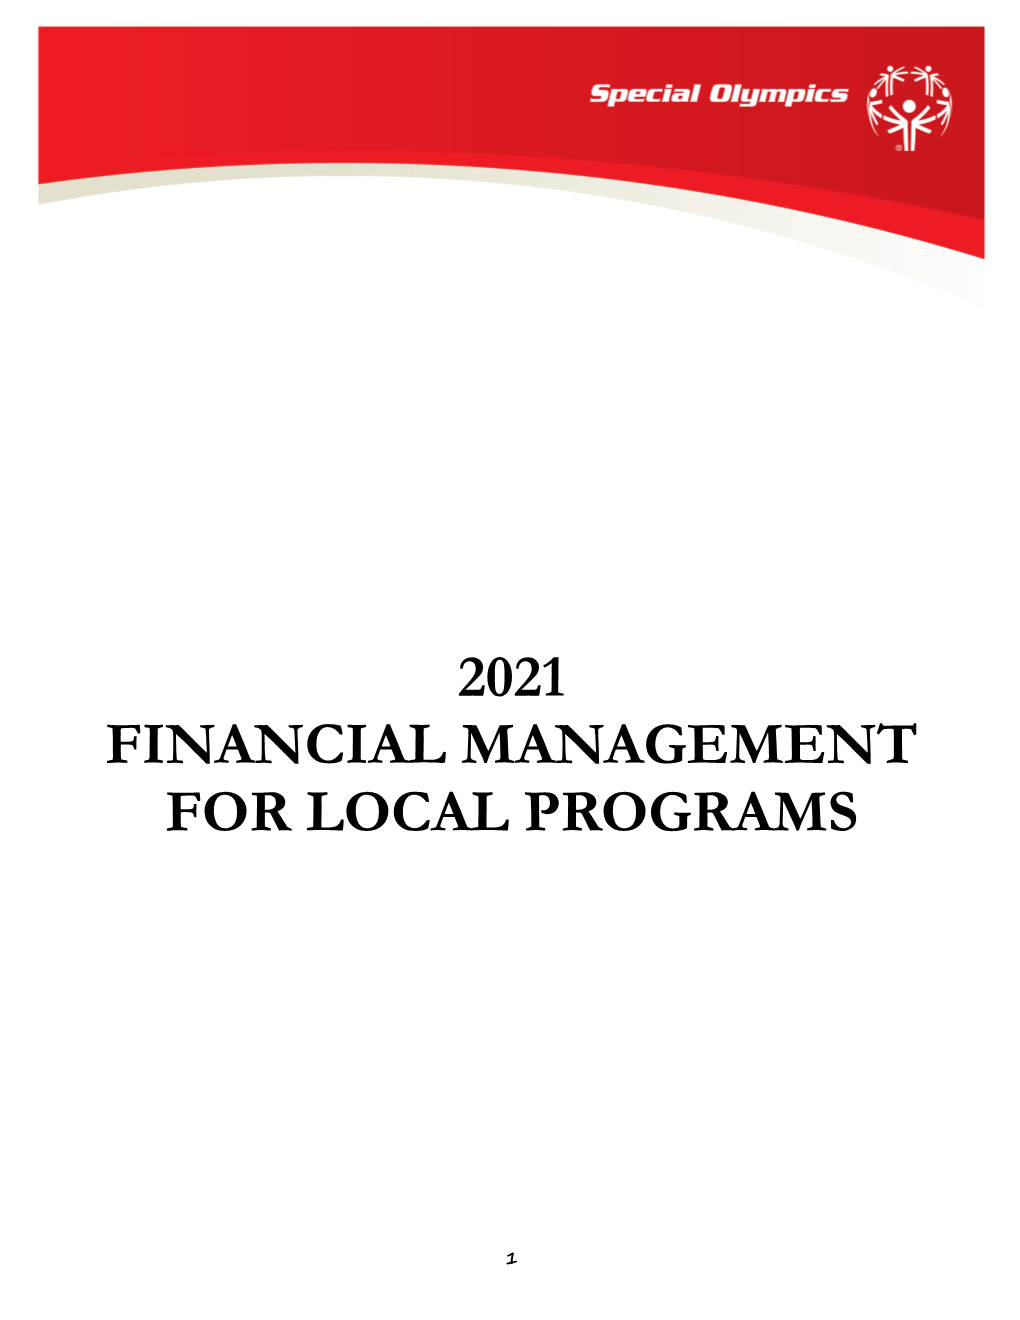 2021 Financial Management for Local Programs